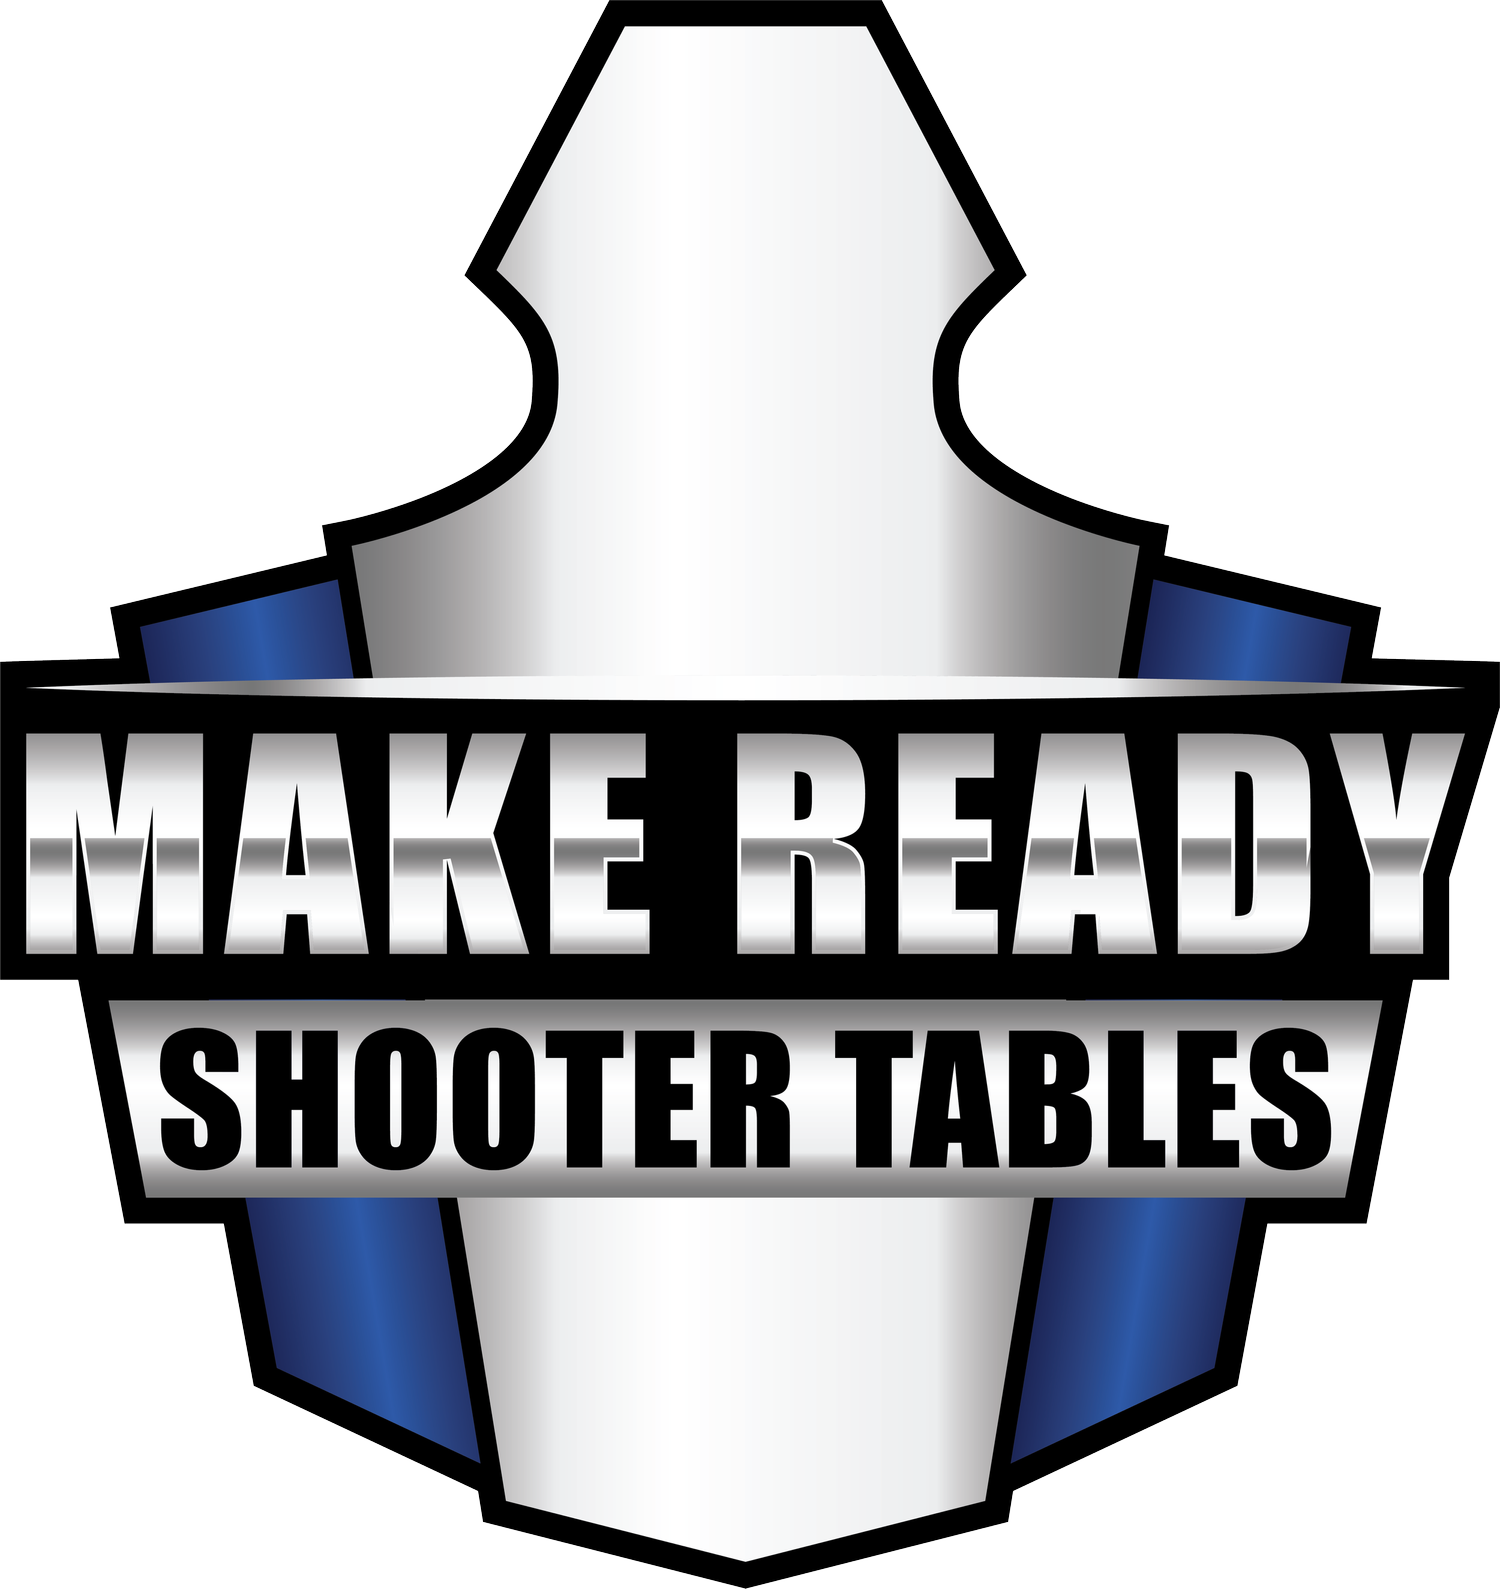 Make Ready Shooter Tables